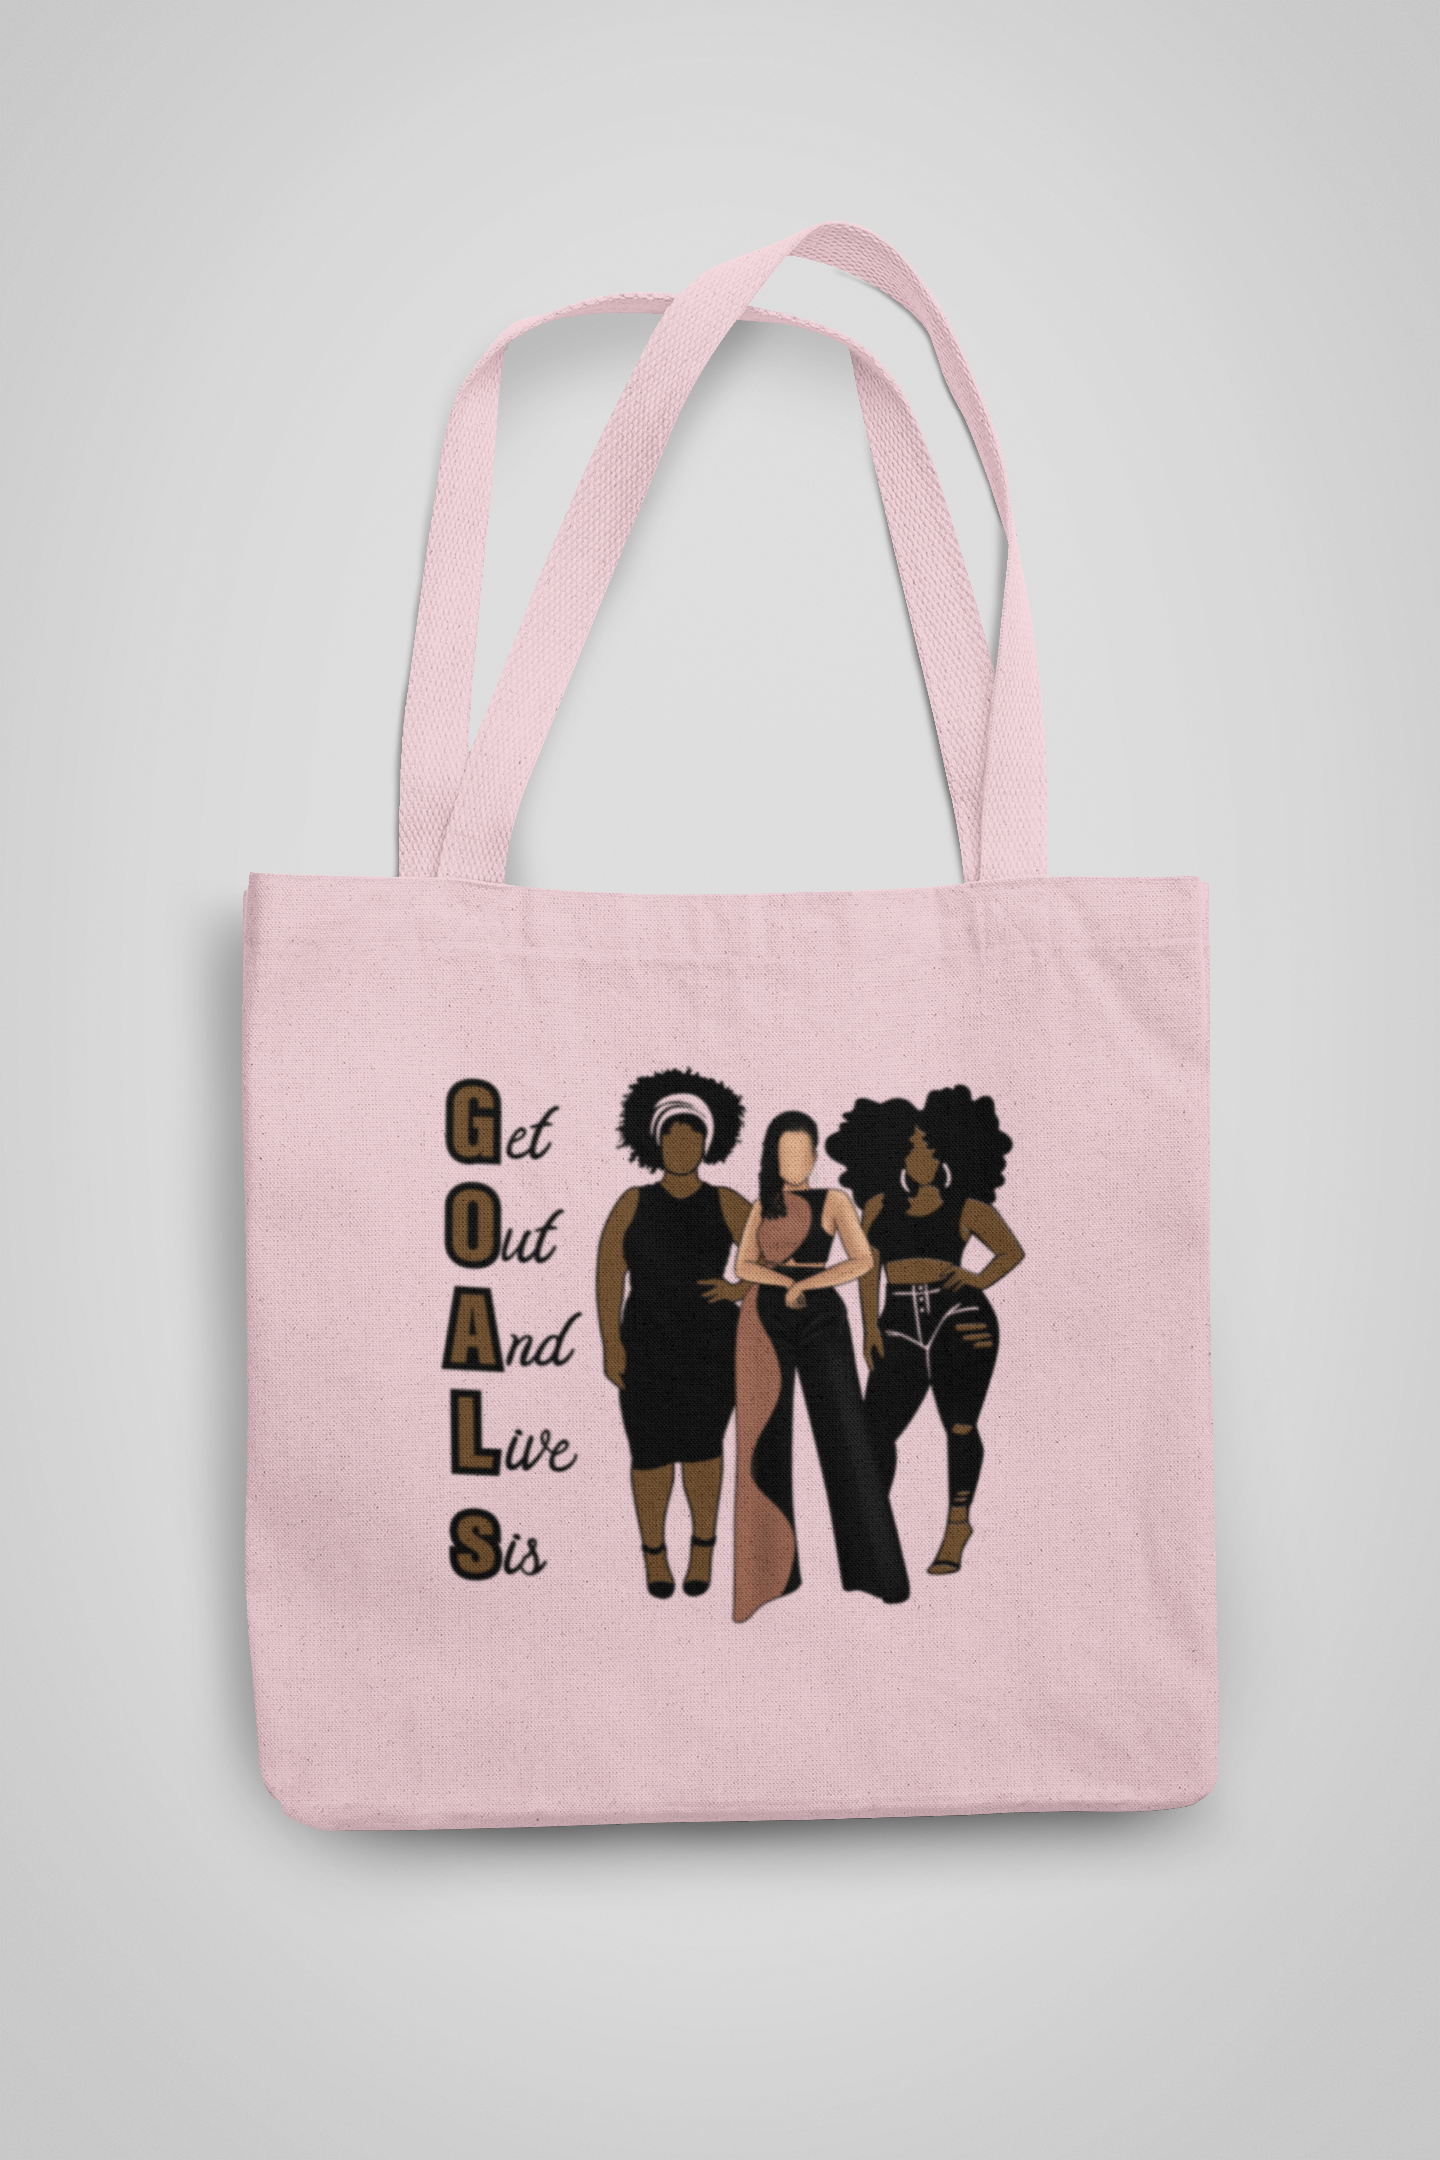 G.O.A.L.S (Get Out And Live Sis)  Tote Bags